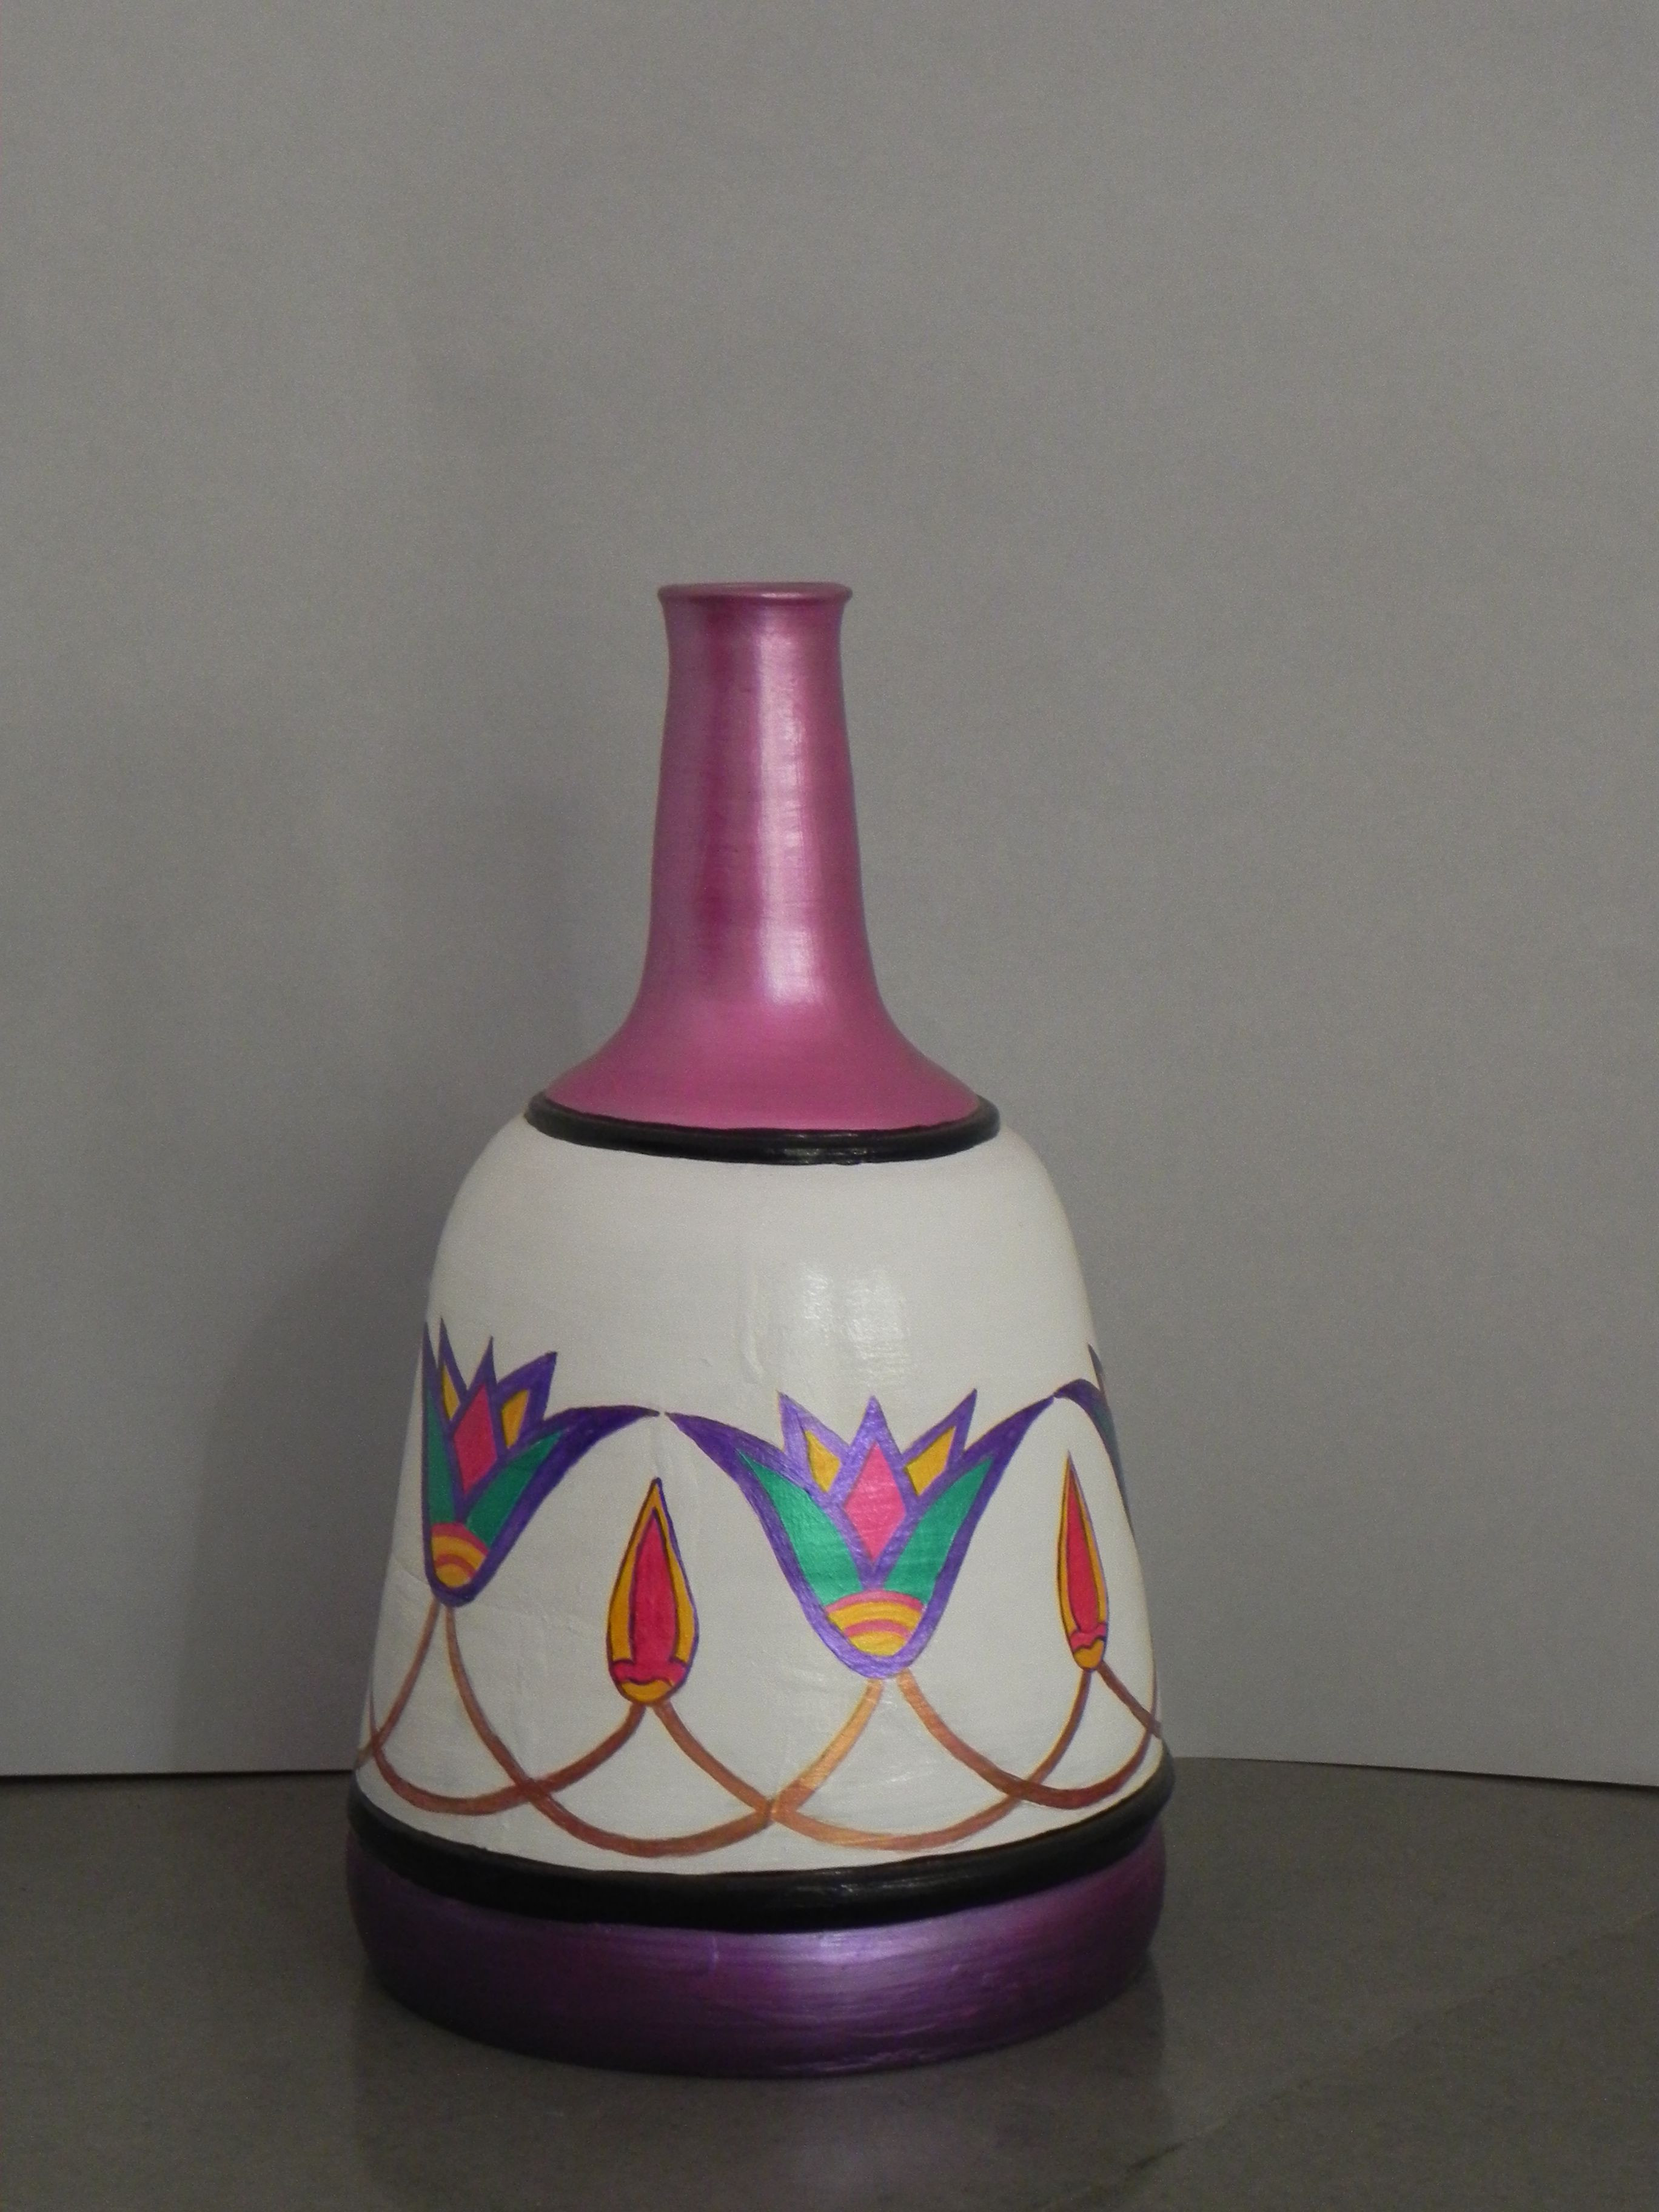 15 Unique Tall White Vases Sale 2024 free download tall white vases sale of egyptian style pot floral design in egyptian style white background intended for egyptian style pot floral design in egyptian style white background pink neck violet